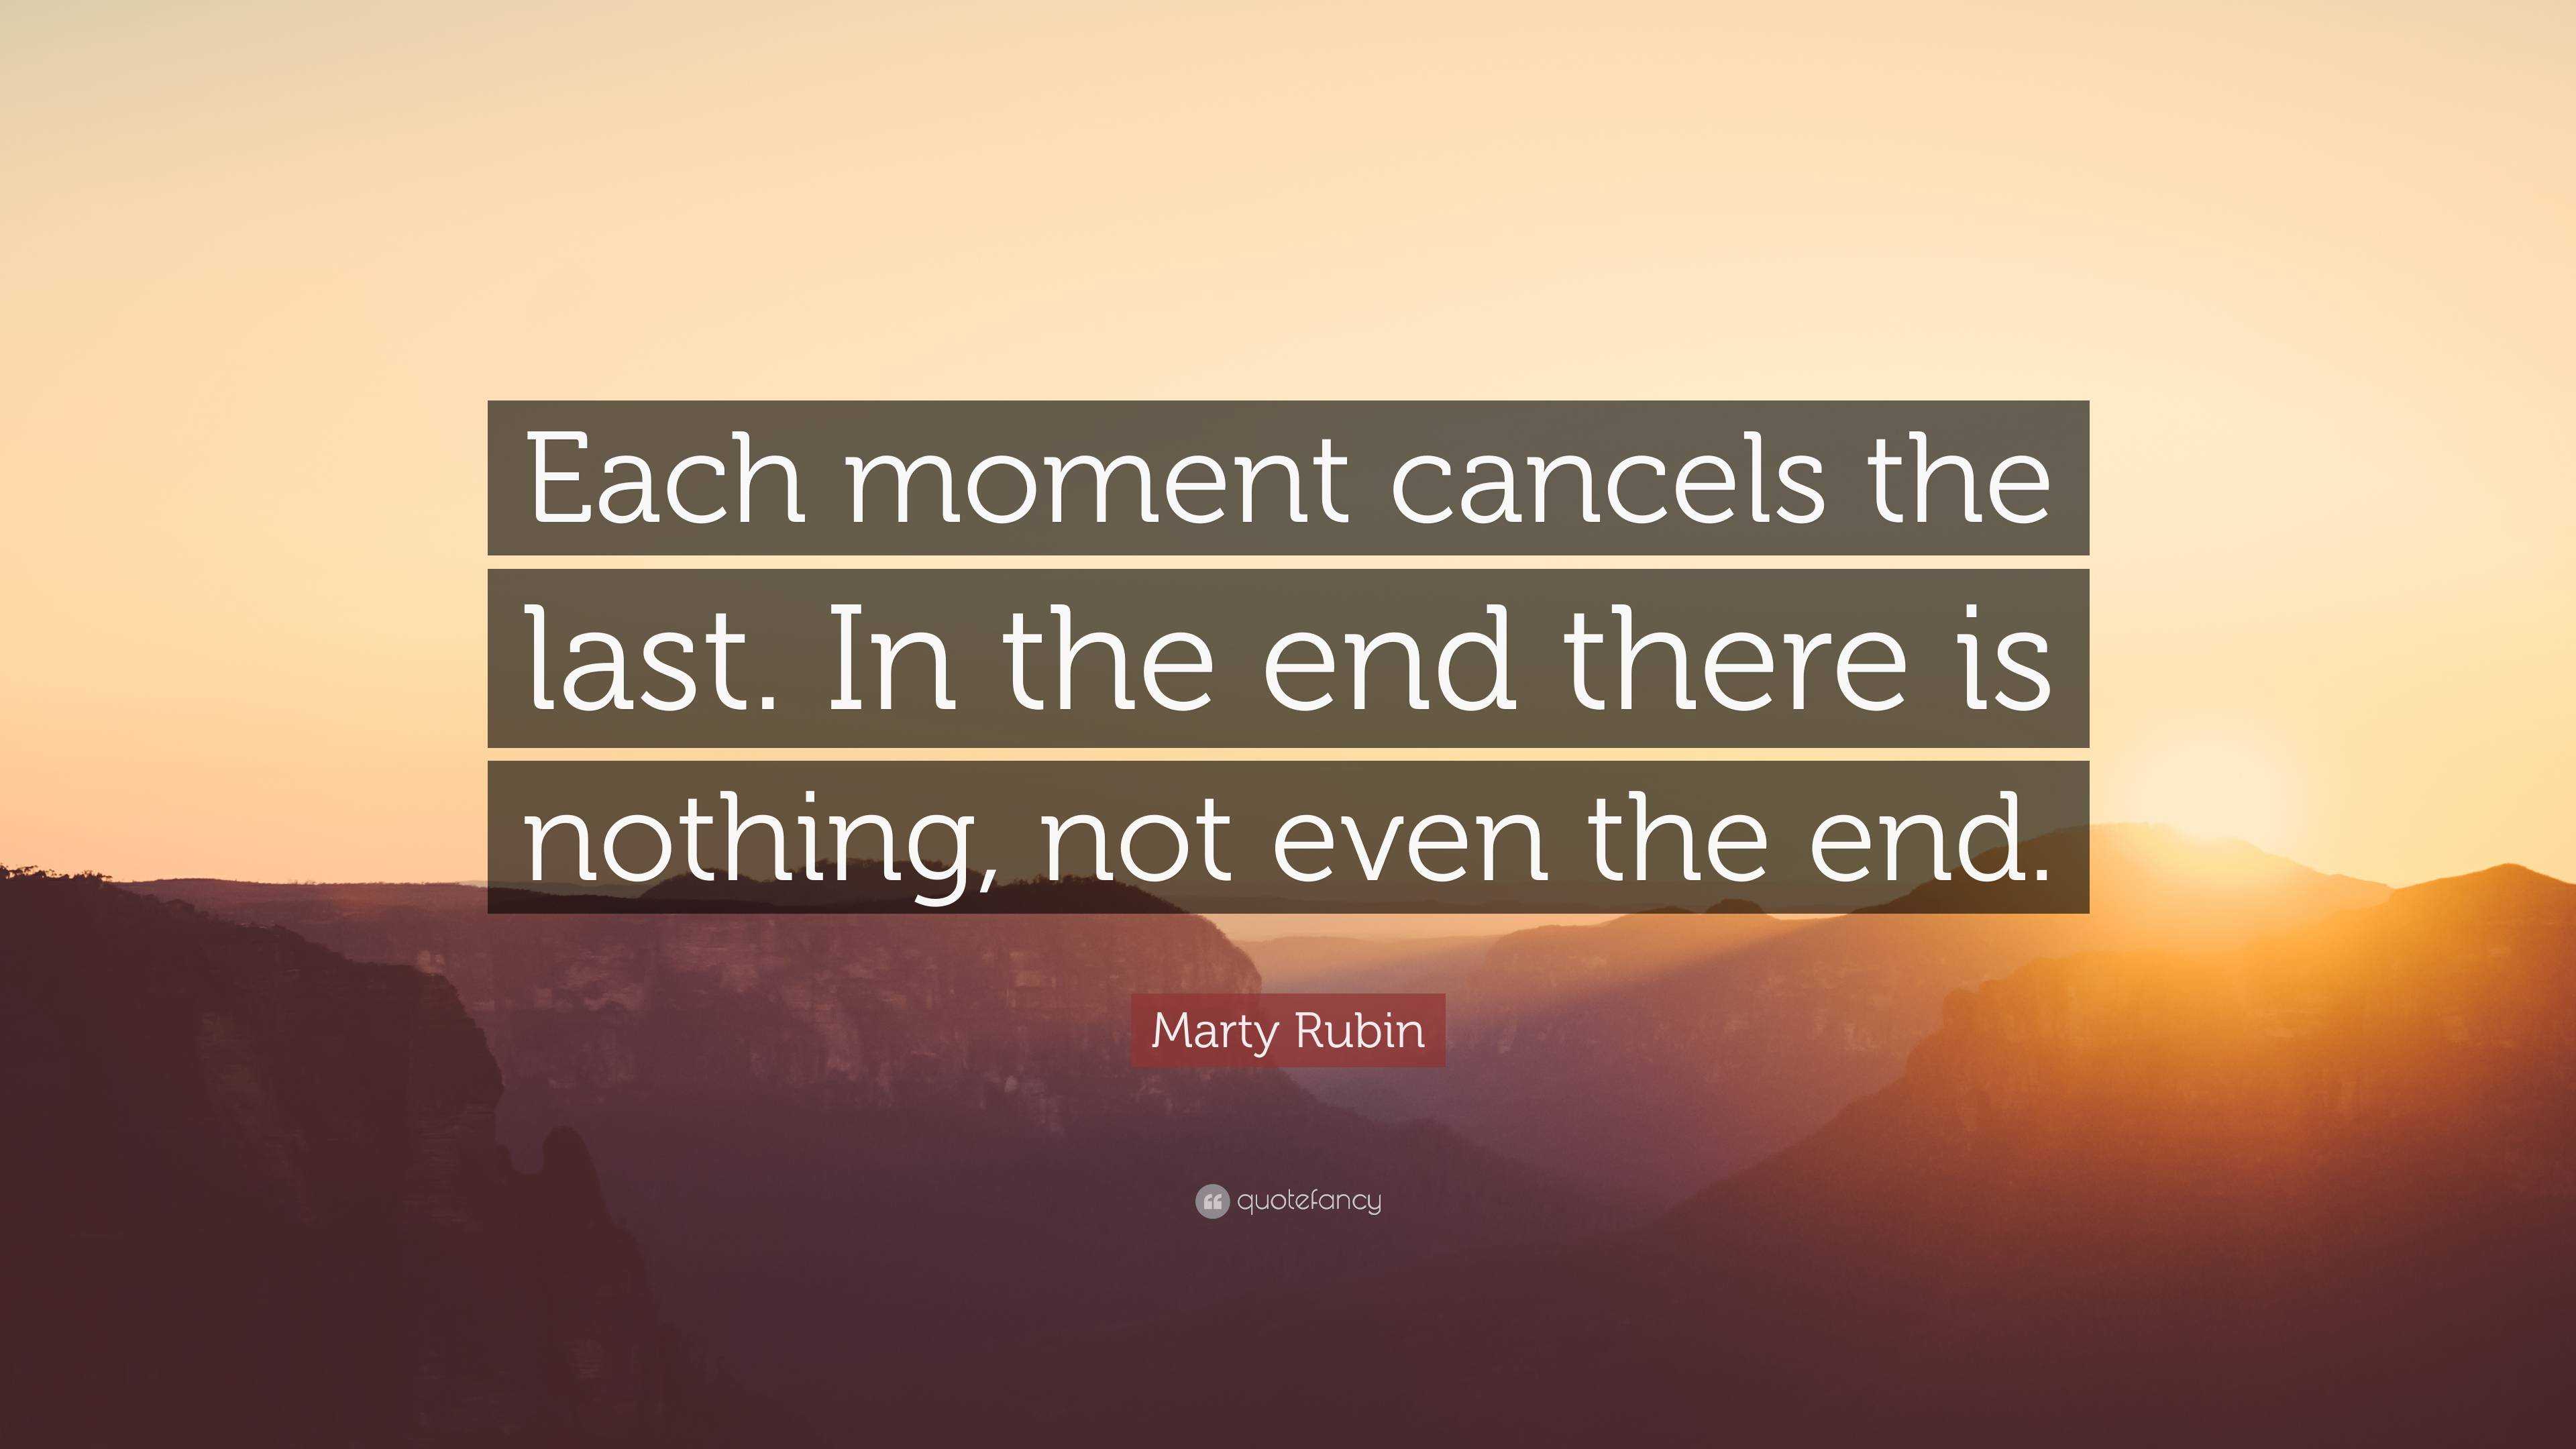 Marty Rubin Quote: “Each moment cancels the last. In the end there is ...